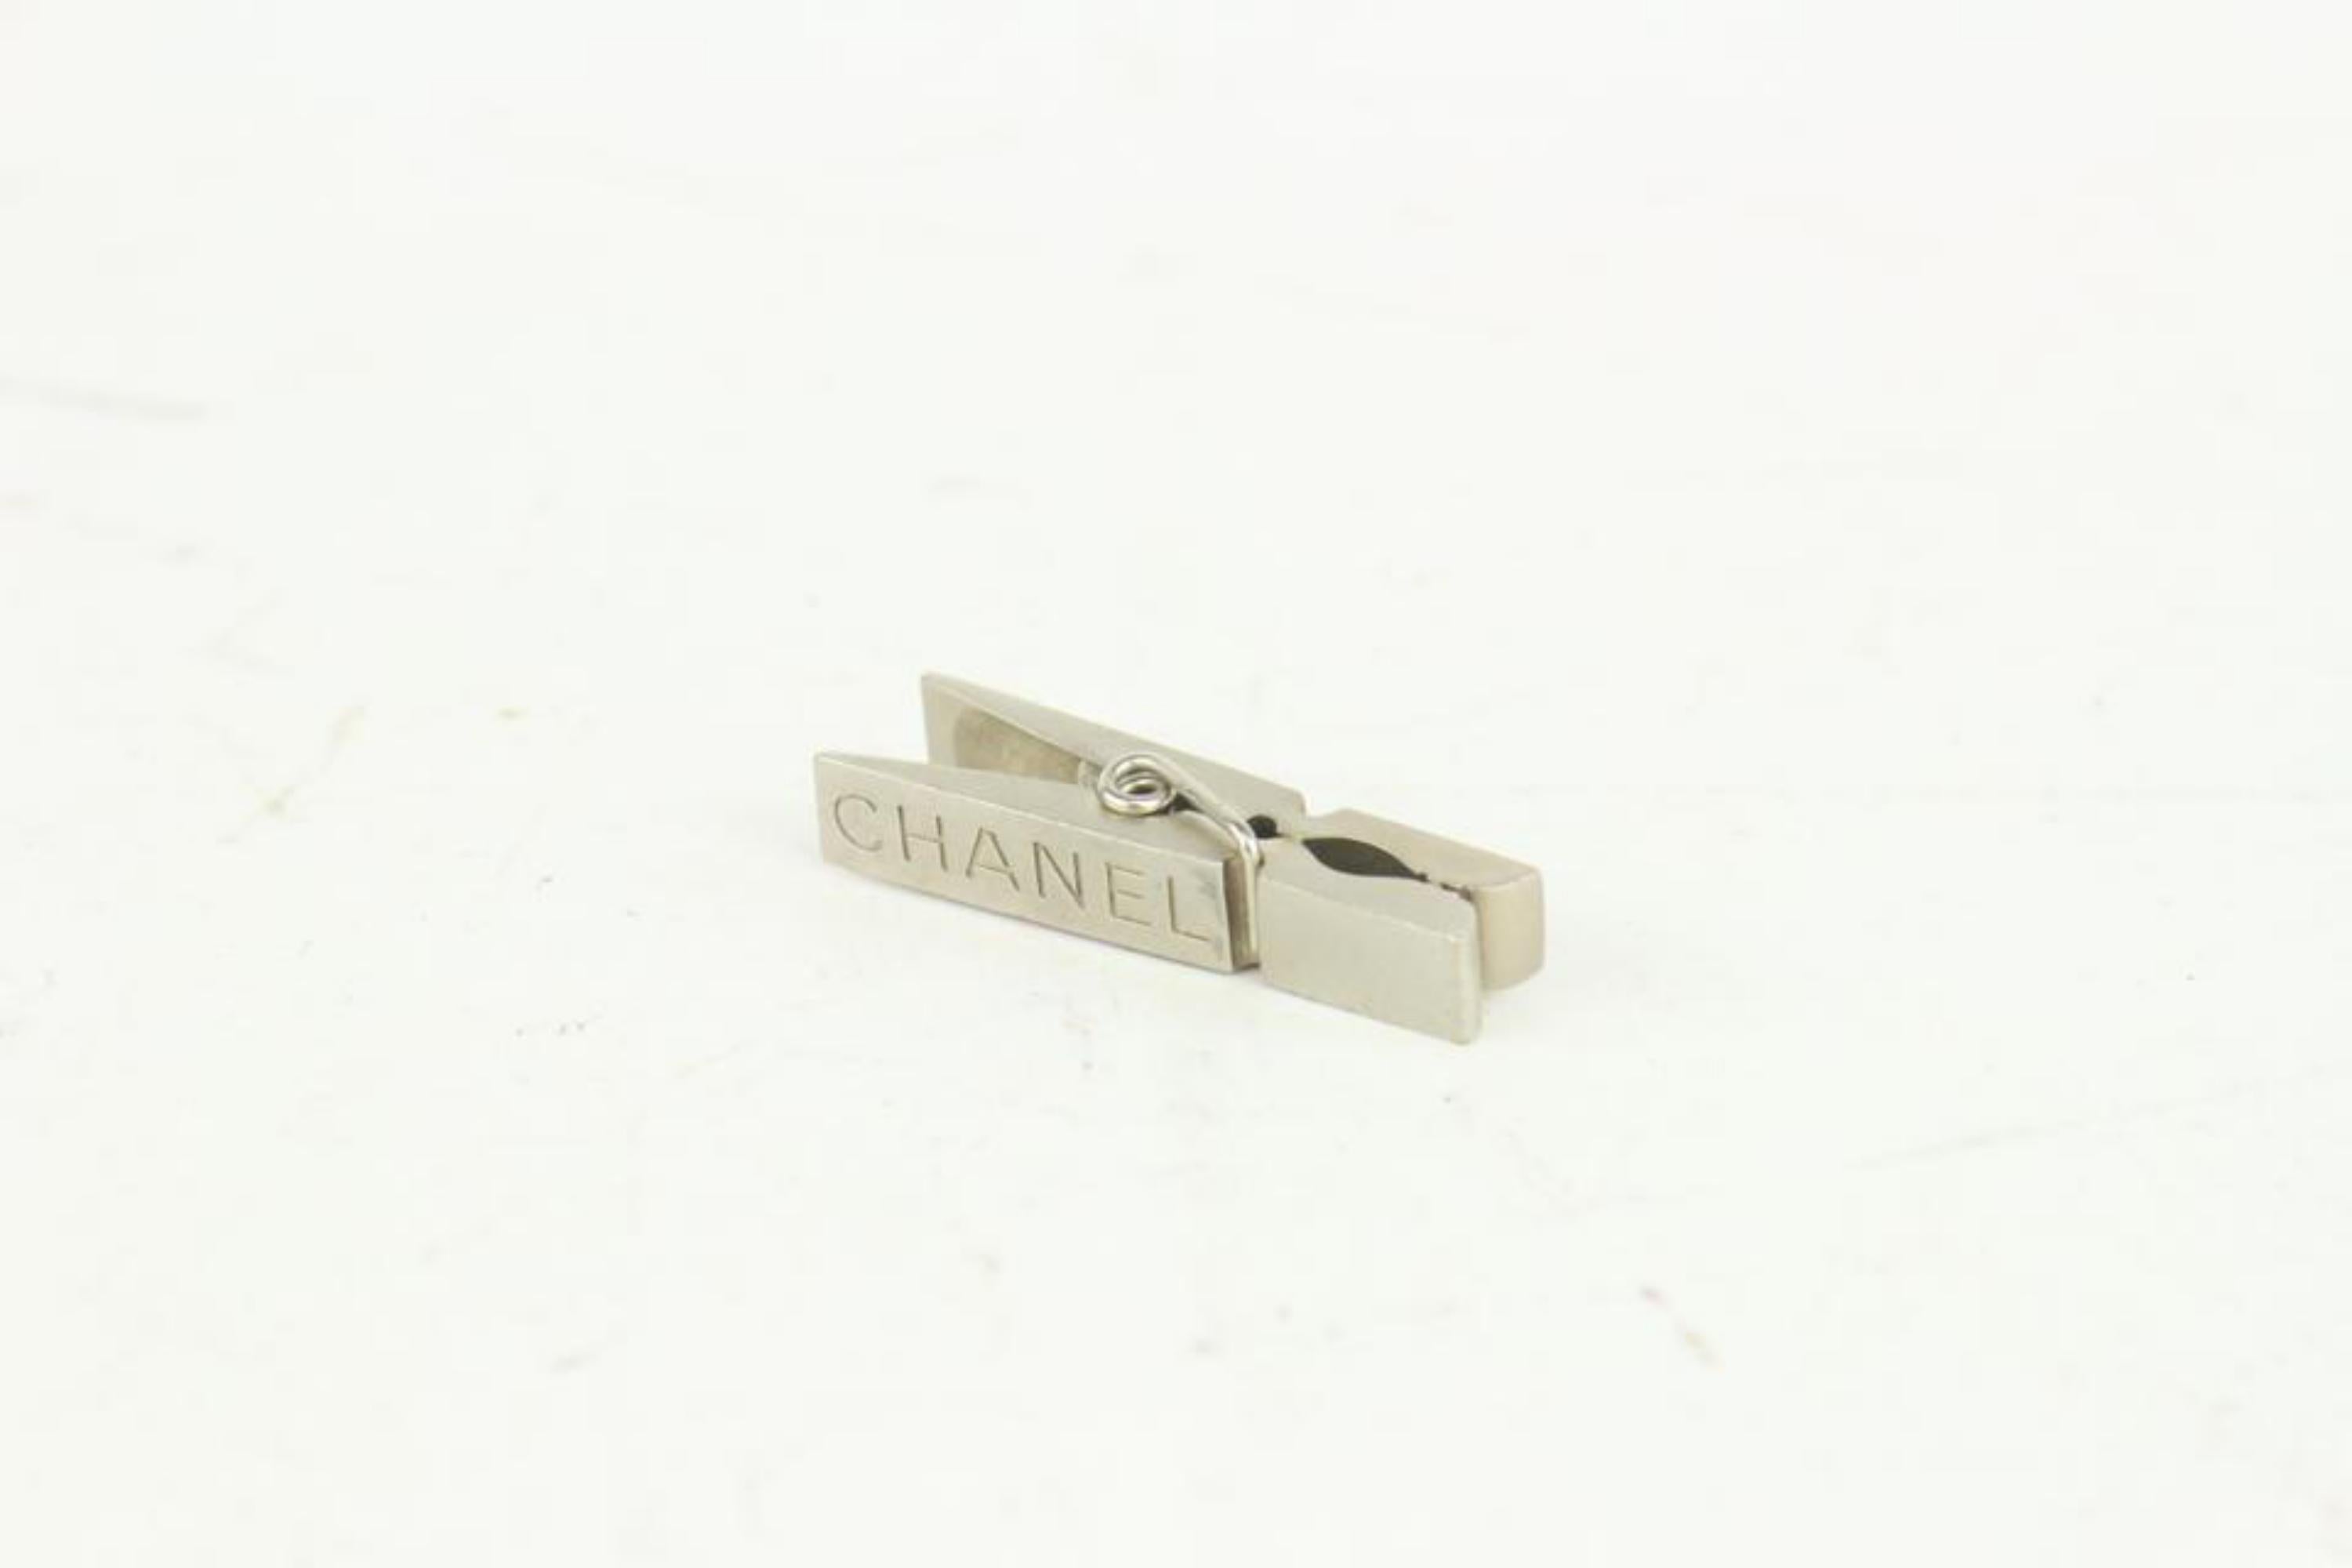 Chanel 98A Clothes Pin Brooch Clip 1014c17 In Excellent Condition For Sale In Dix hills, NY